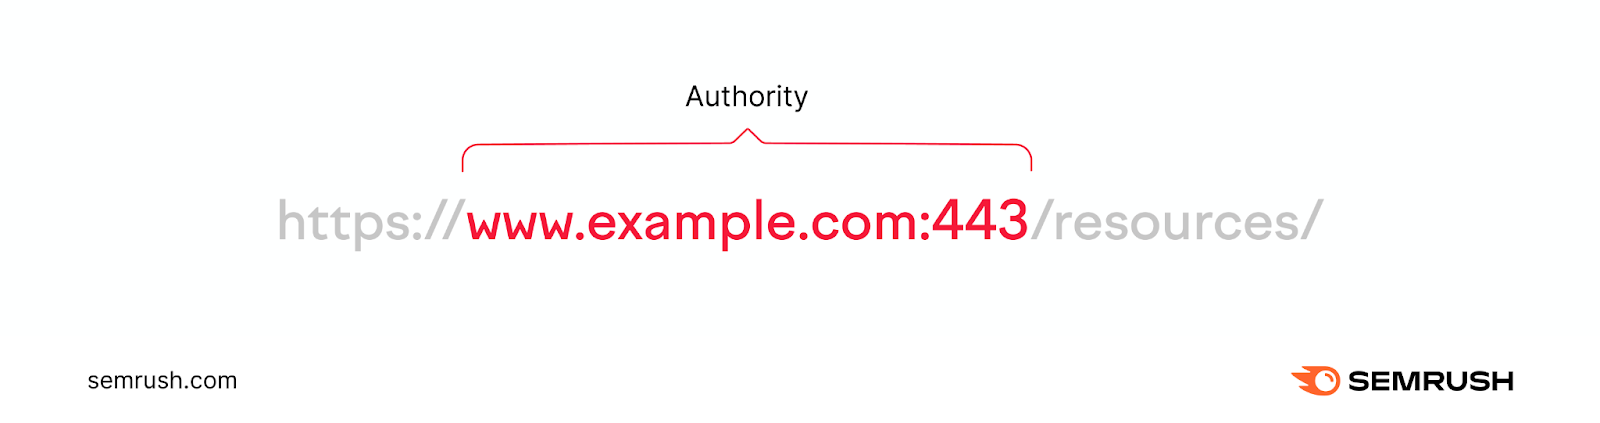 An URL with "www.example.com:443" part marked as "authority"